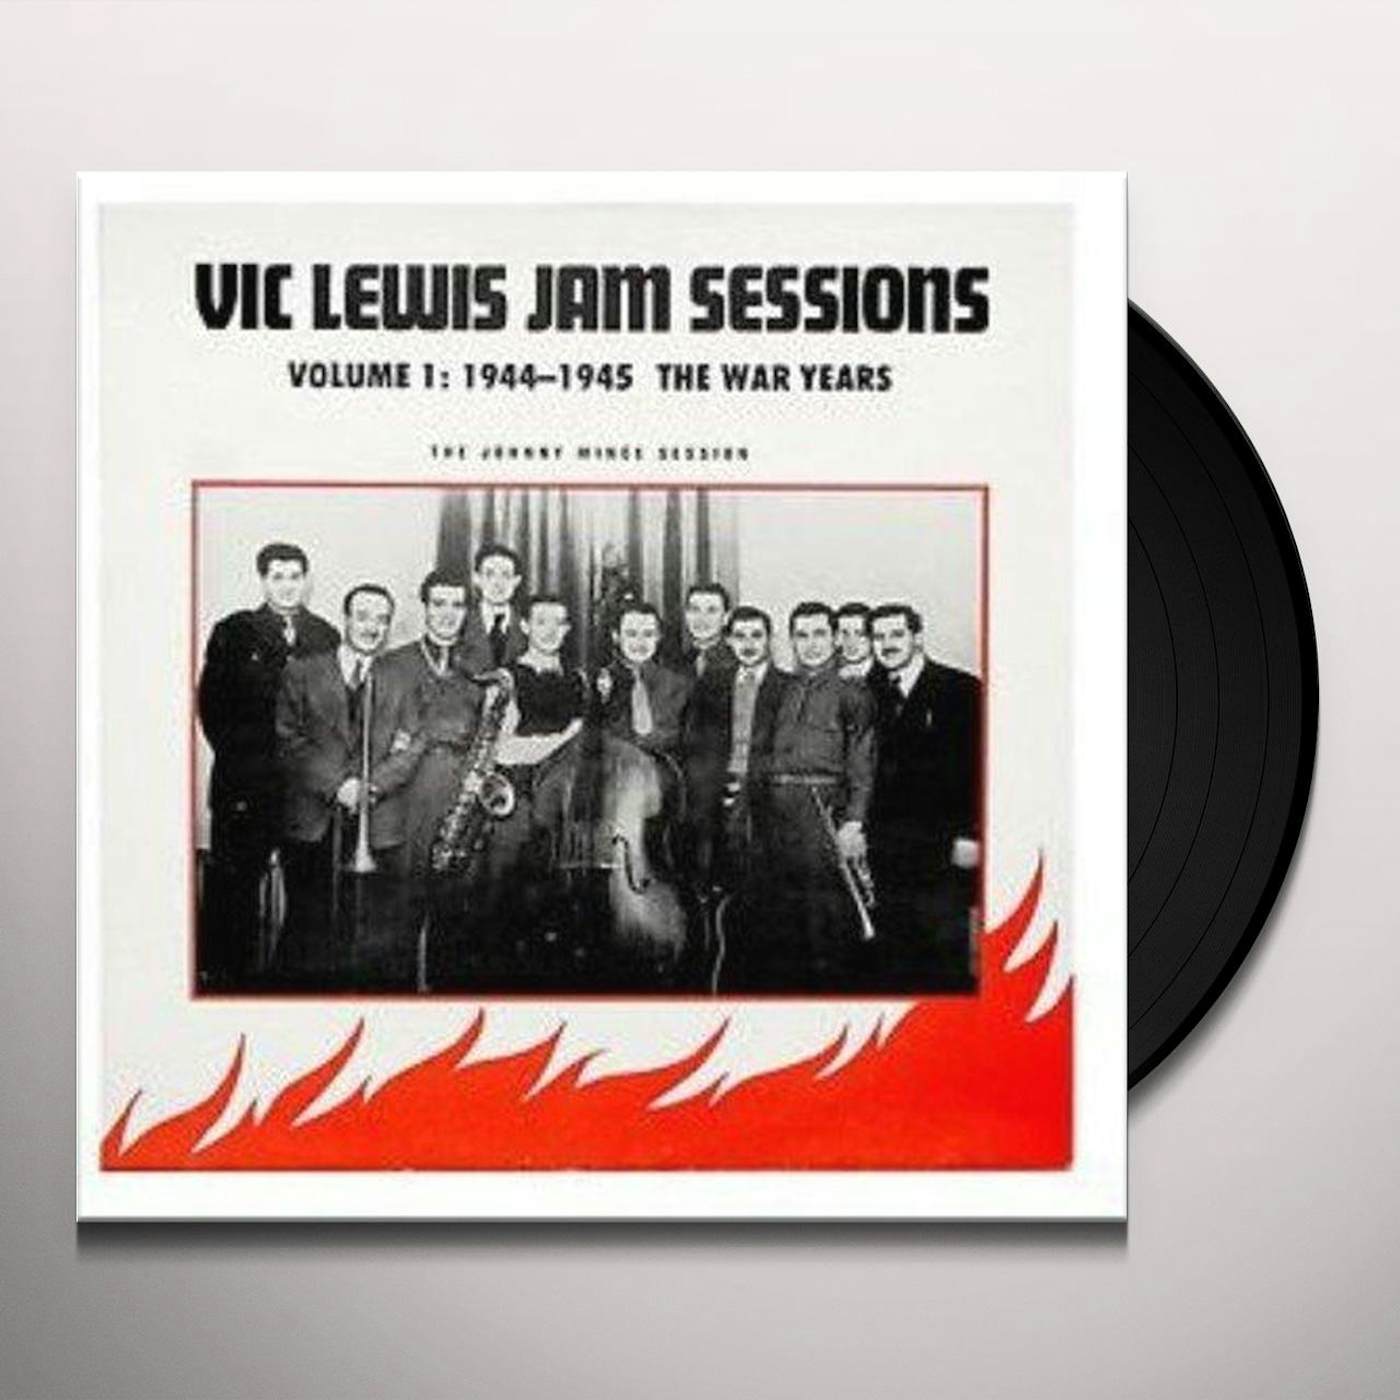 Vic Lewis JAM SESSIONS VOLUME 1: 1944-1945 THE WAR YEARS Vinyl Record